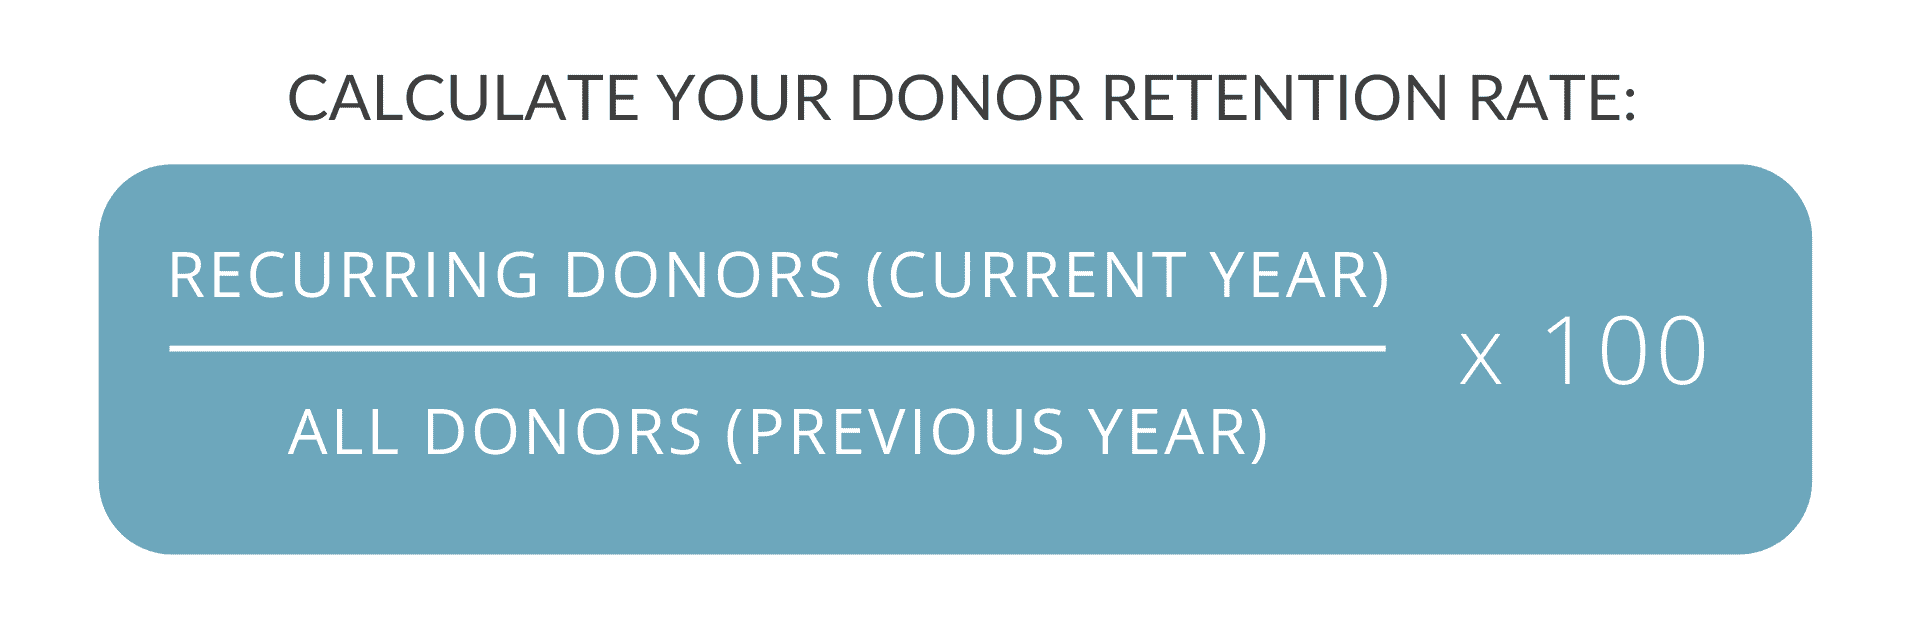 formula to calculate donor retention rate